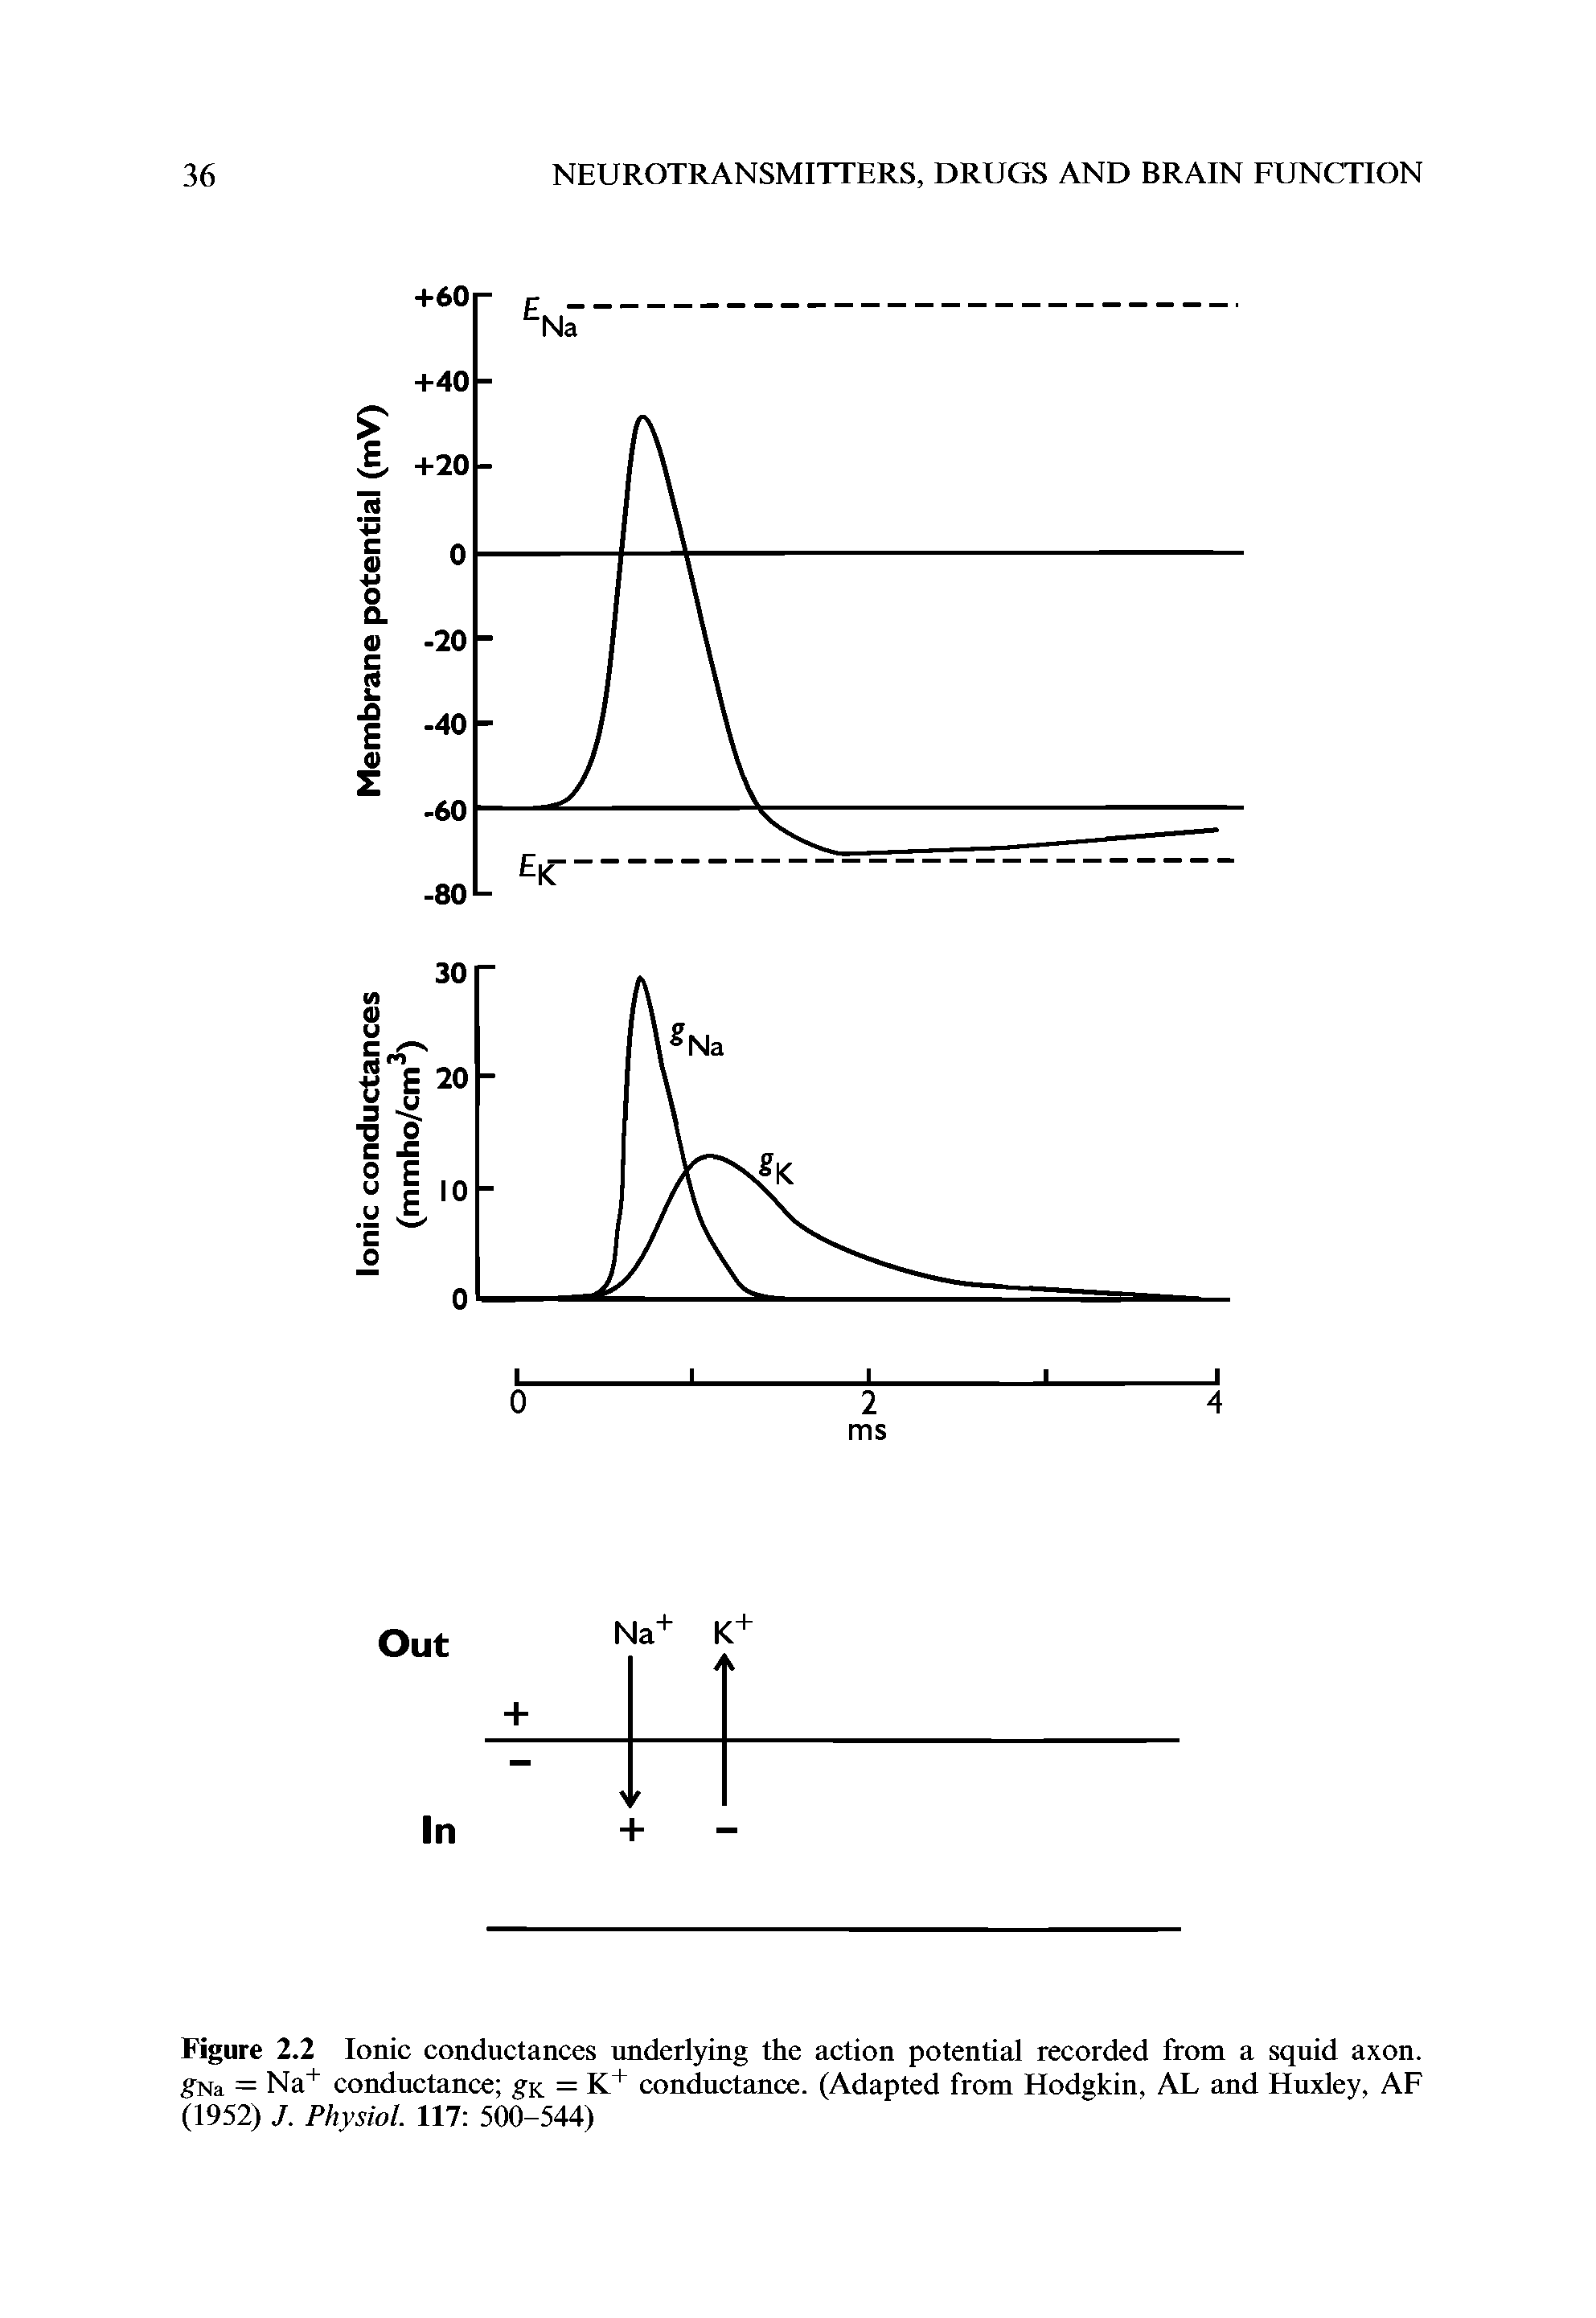 Figure 2.2 Ionic conductances underlying the action potential recorded from a squid axon. gNa = Na conductance gK = K+ conductance. (Adapted from Hodgkin, AL and Huxley, AF (1952) J. Physiol. 117 500-544)...